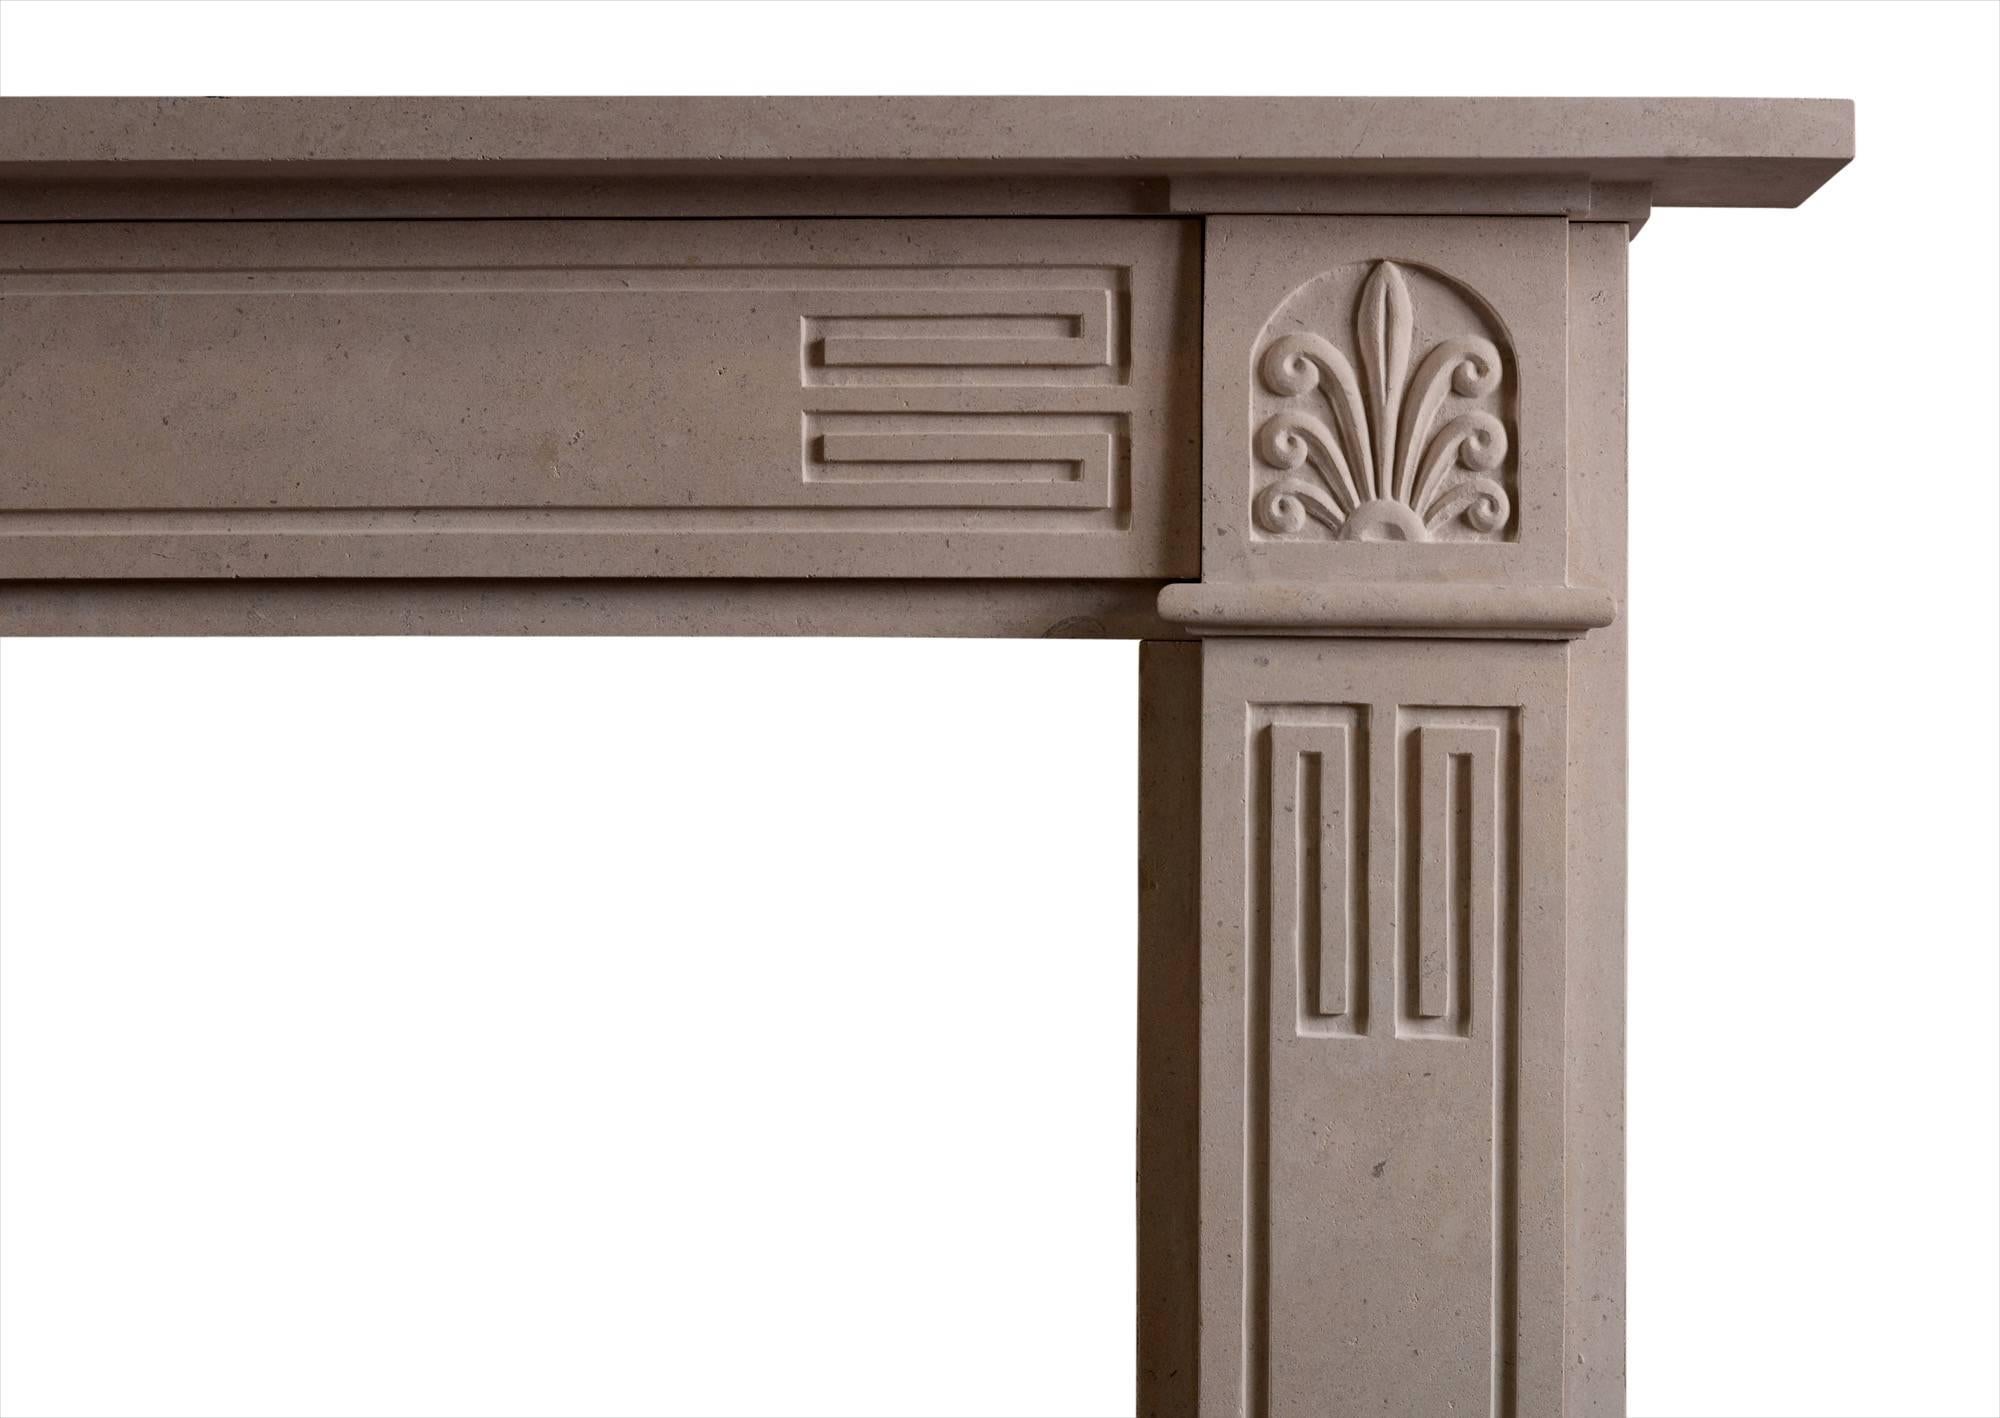 An English Bath stone fireplace in the Regency style. The panelled frieze and jambs with Greek key motif surmounted by Anthemion leaf. A good quality copy of an original piece.

Measures: 
Shelf Width:	1475 mm      	58 1/8 in
Overall Height:	1175 mm